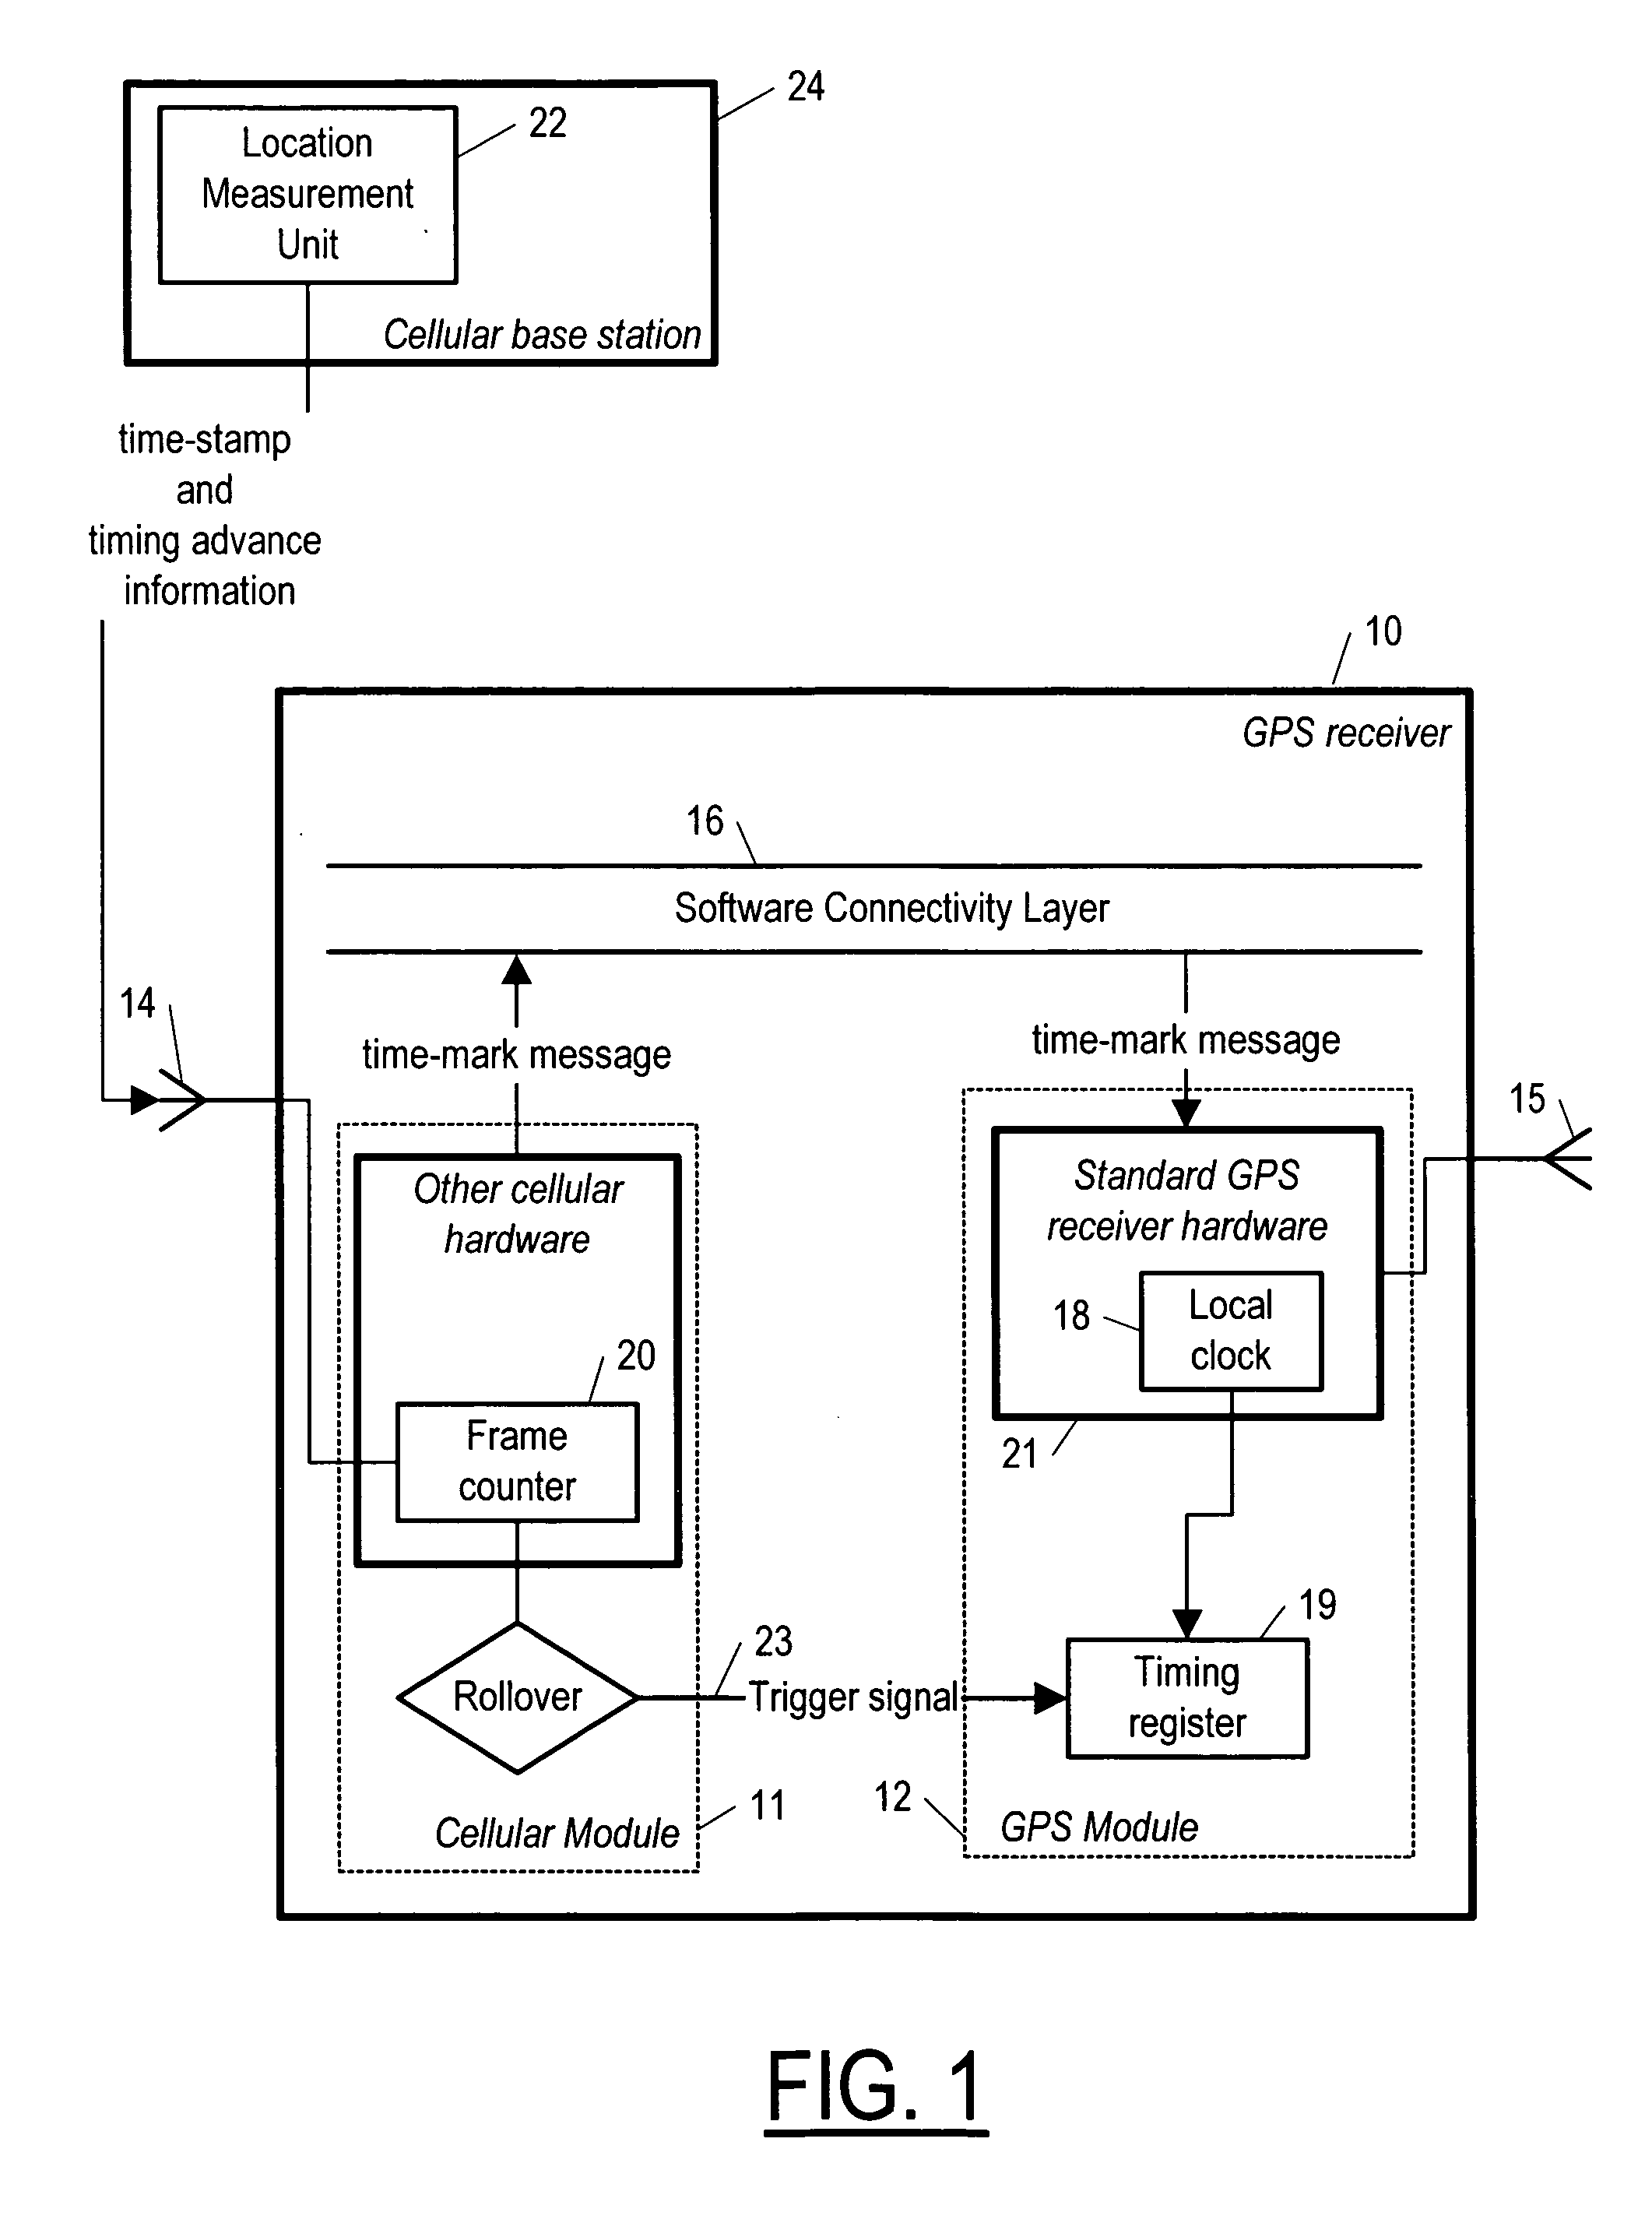 Method, apparatus and system for GPS time synchronization using cellular signal bursts